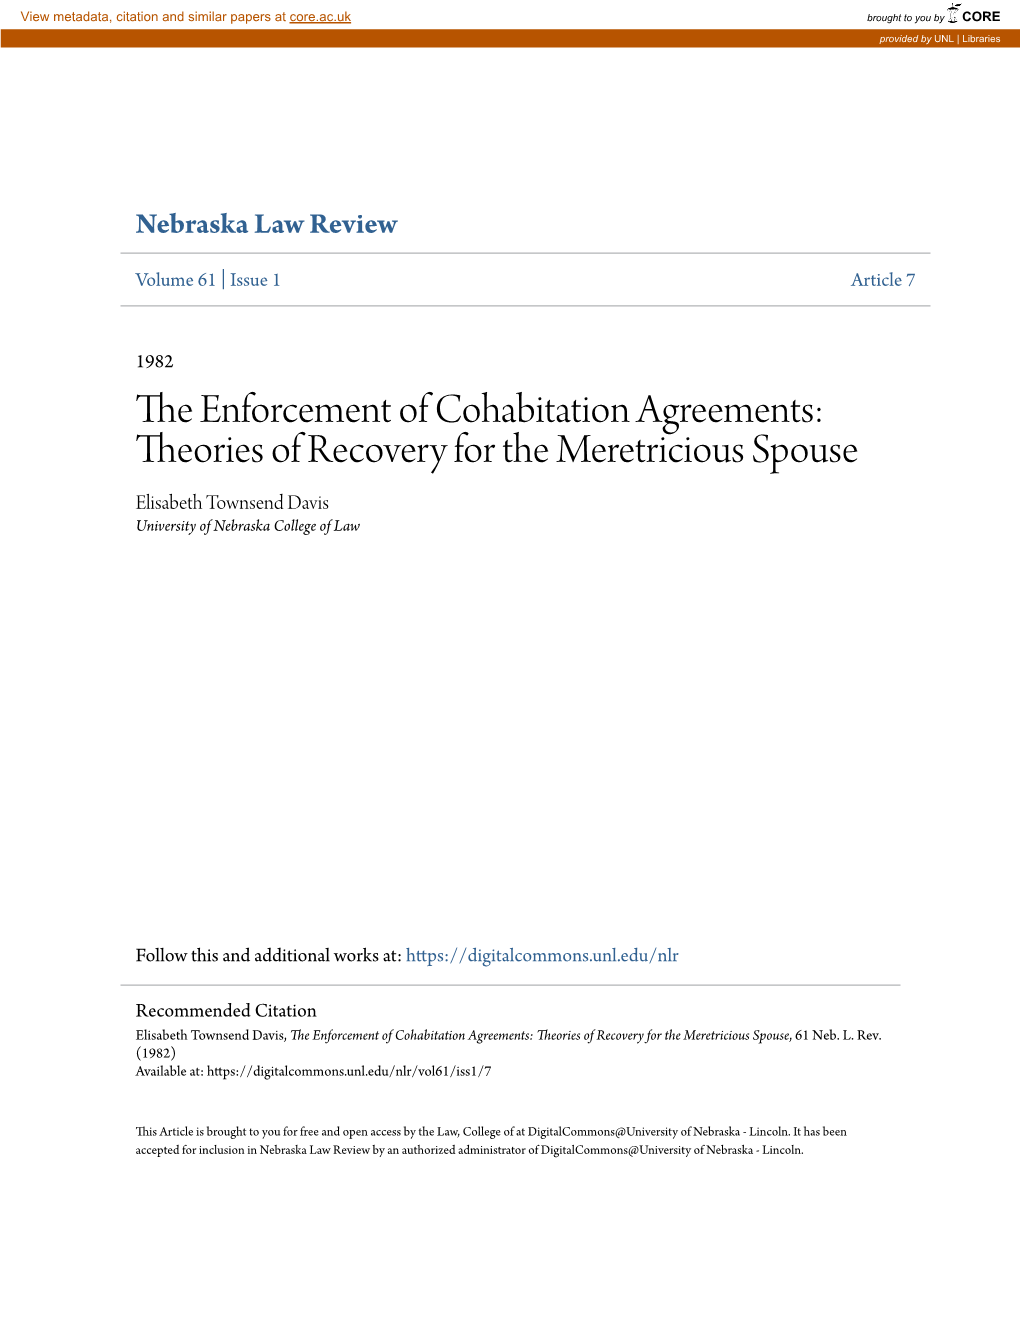 The Enforcement of Cohabitation Agreements: Theories of Recovery for the Meretricious Spouse, 61 Neb